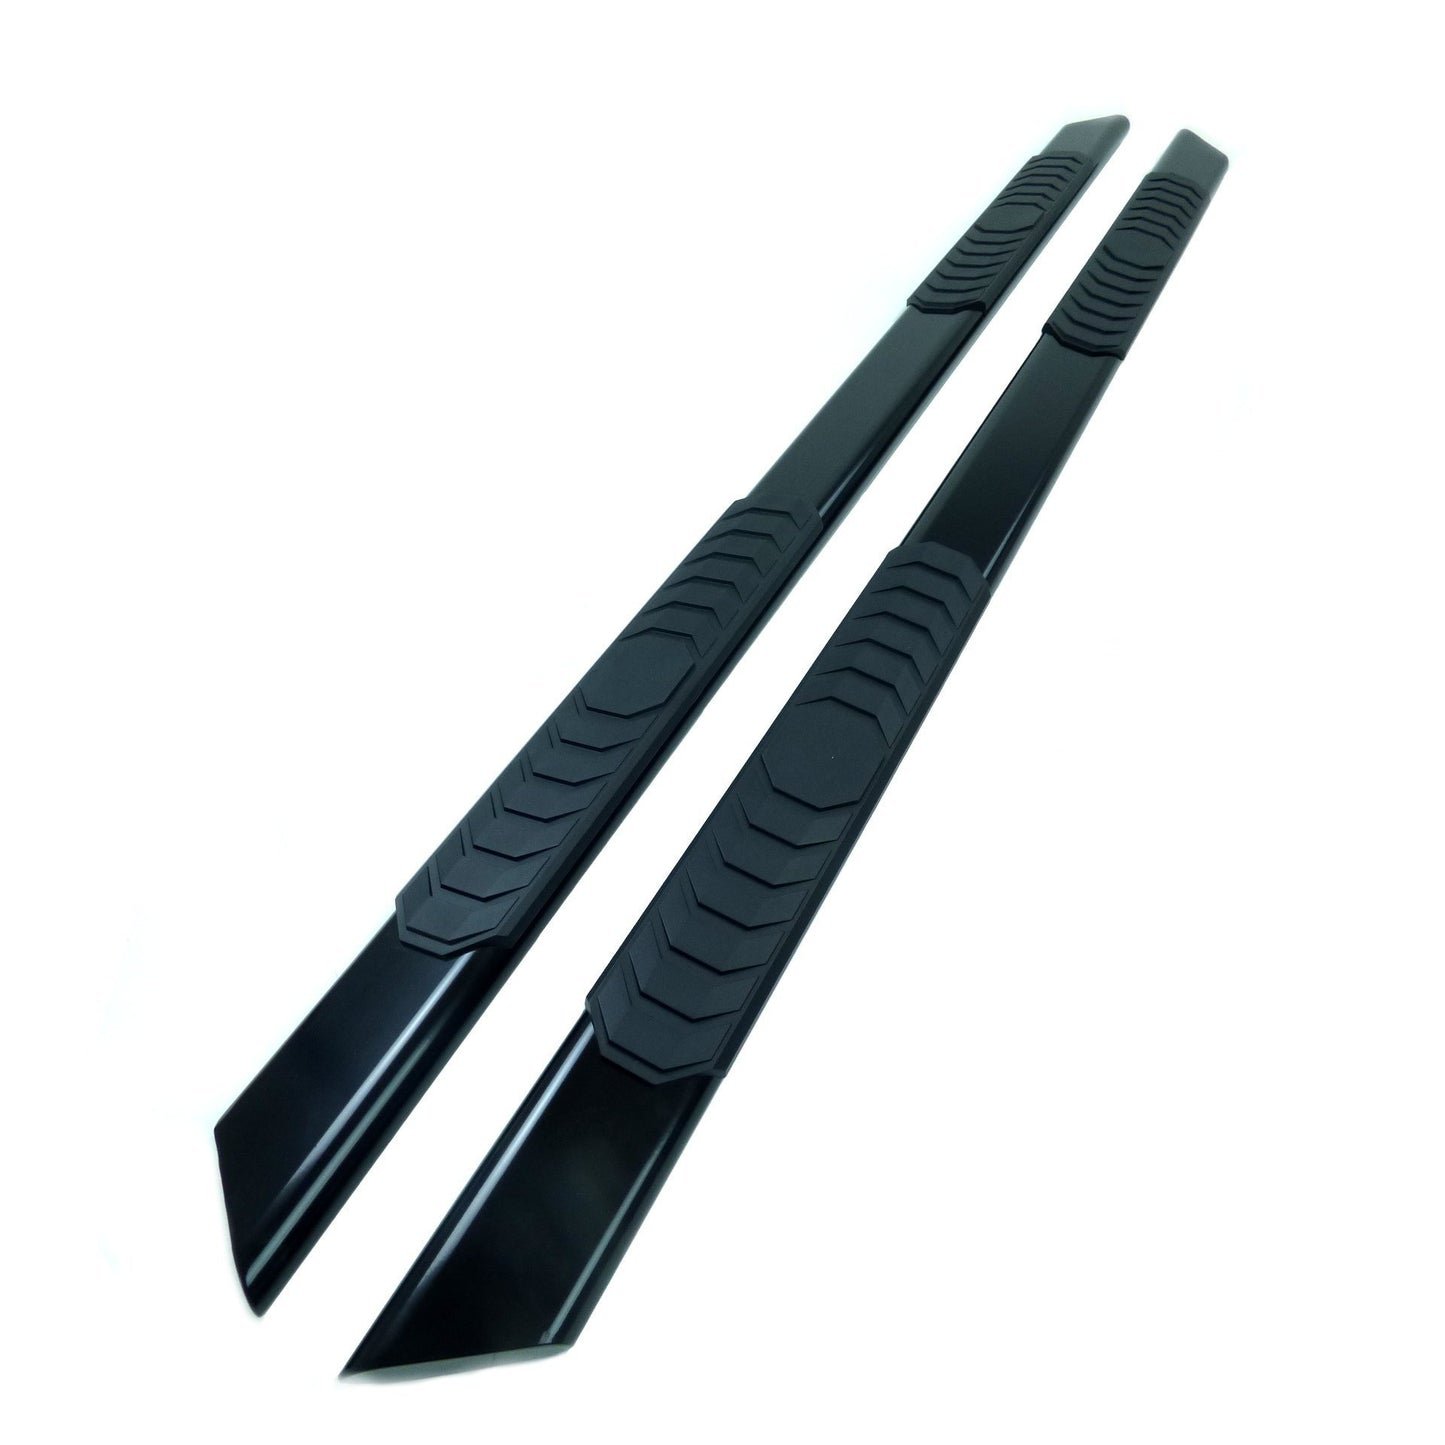 Black Sonar Side Steps Running Boards for Isuzu D-Max Double Cab 2012-2020 -  - sold by Direct4x4